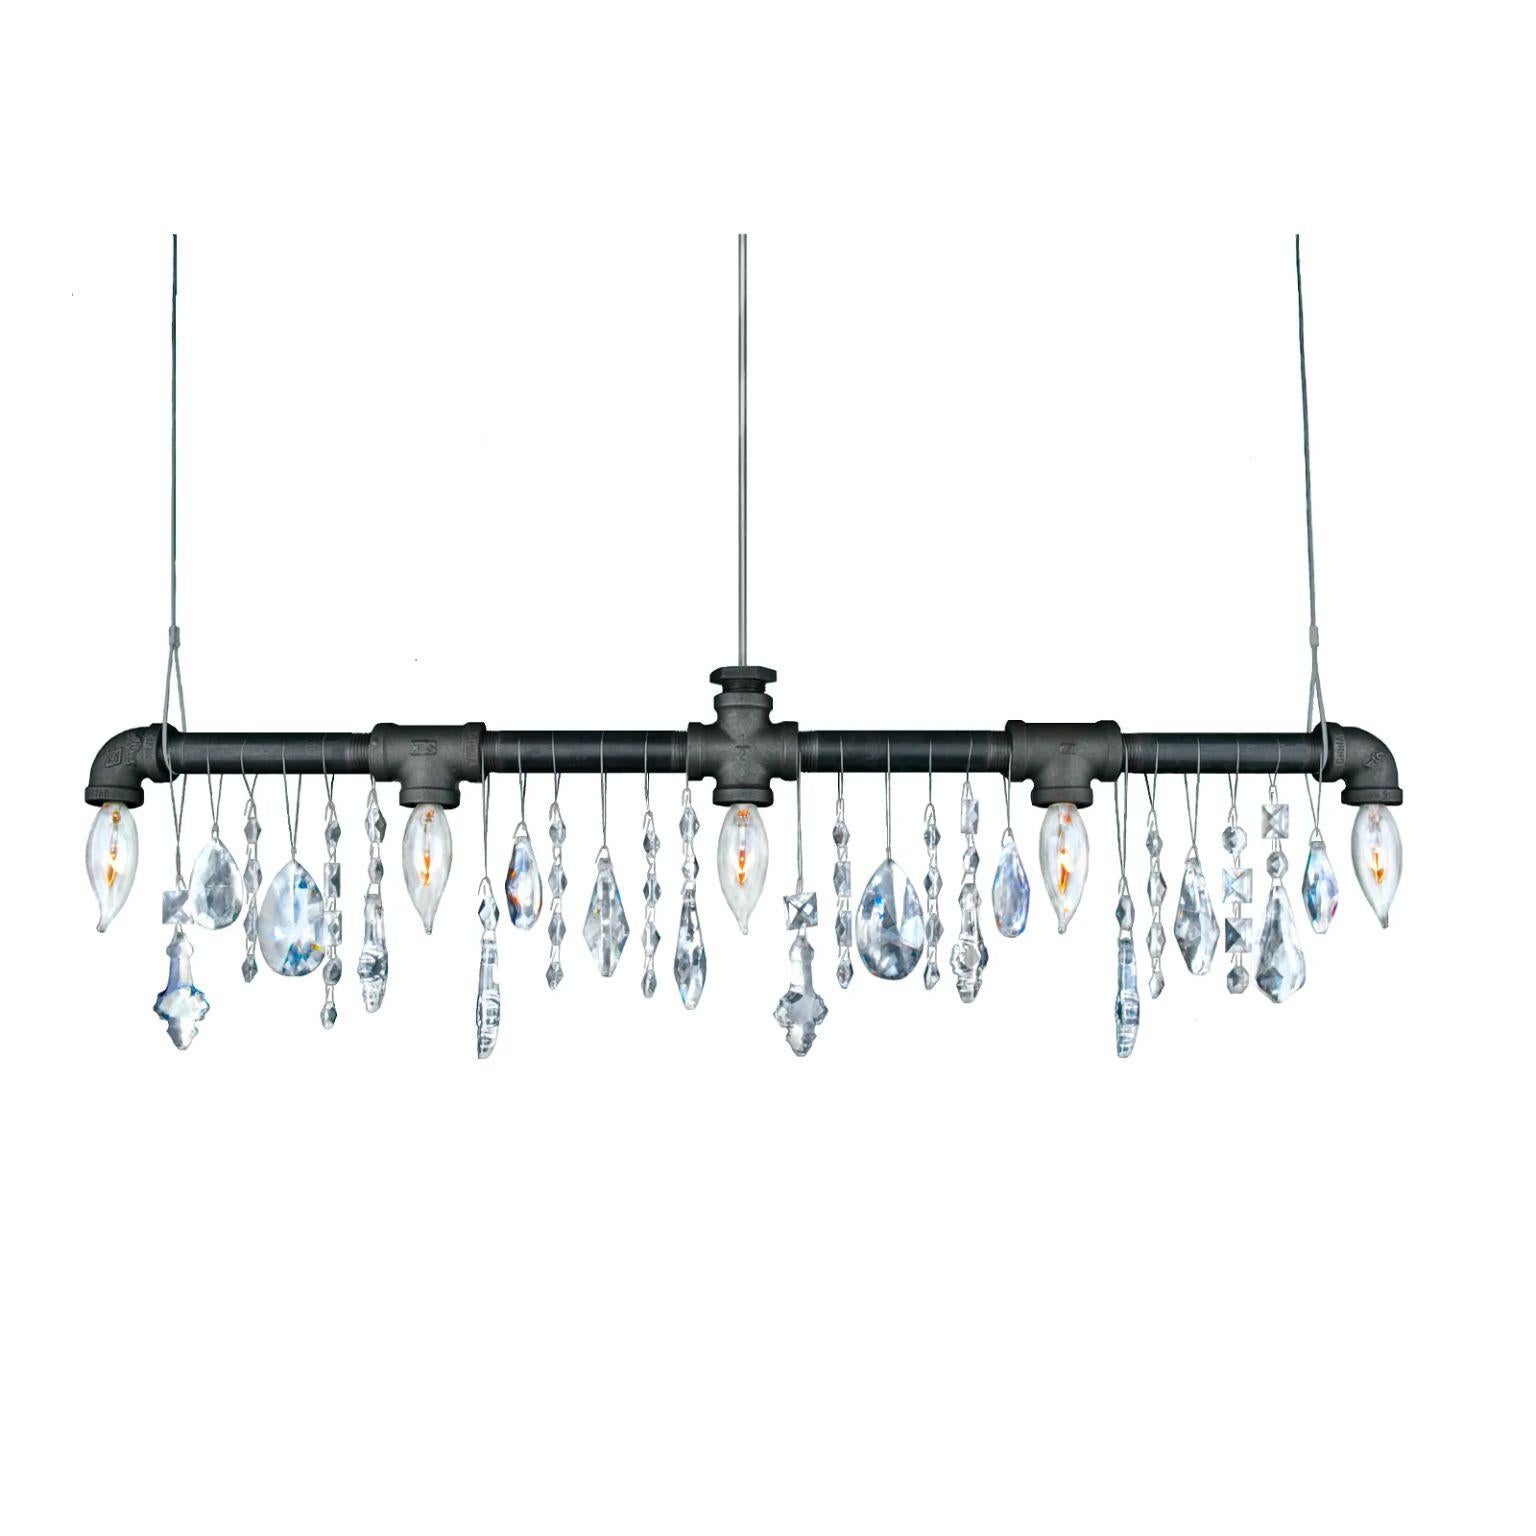 Tribeca bar chandelier linear suspension 29 by Michael McHale
Dimensions: D 3.8 x W 73.5 x H 15.2 cm.
Materials: steel, optically-pure gem-cut crystal.

5 x candelabra base CA7 bulb, either incandescent or LED.

All our lamps can be wired